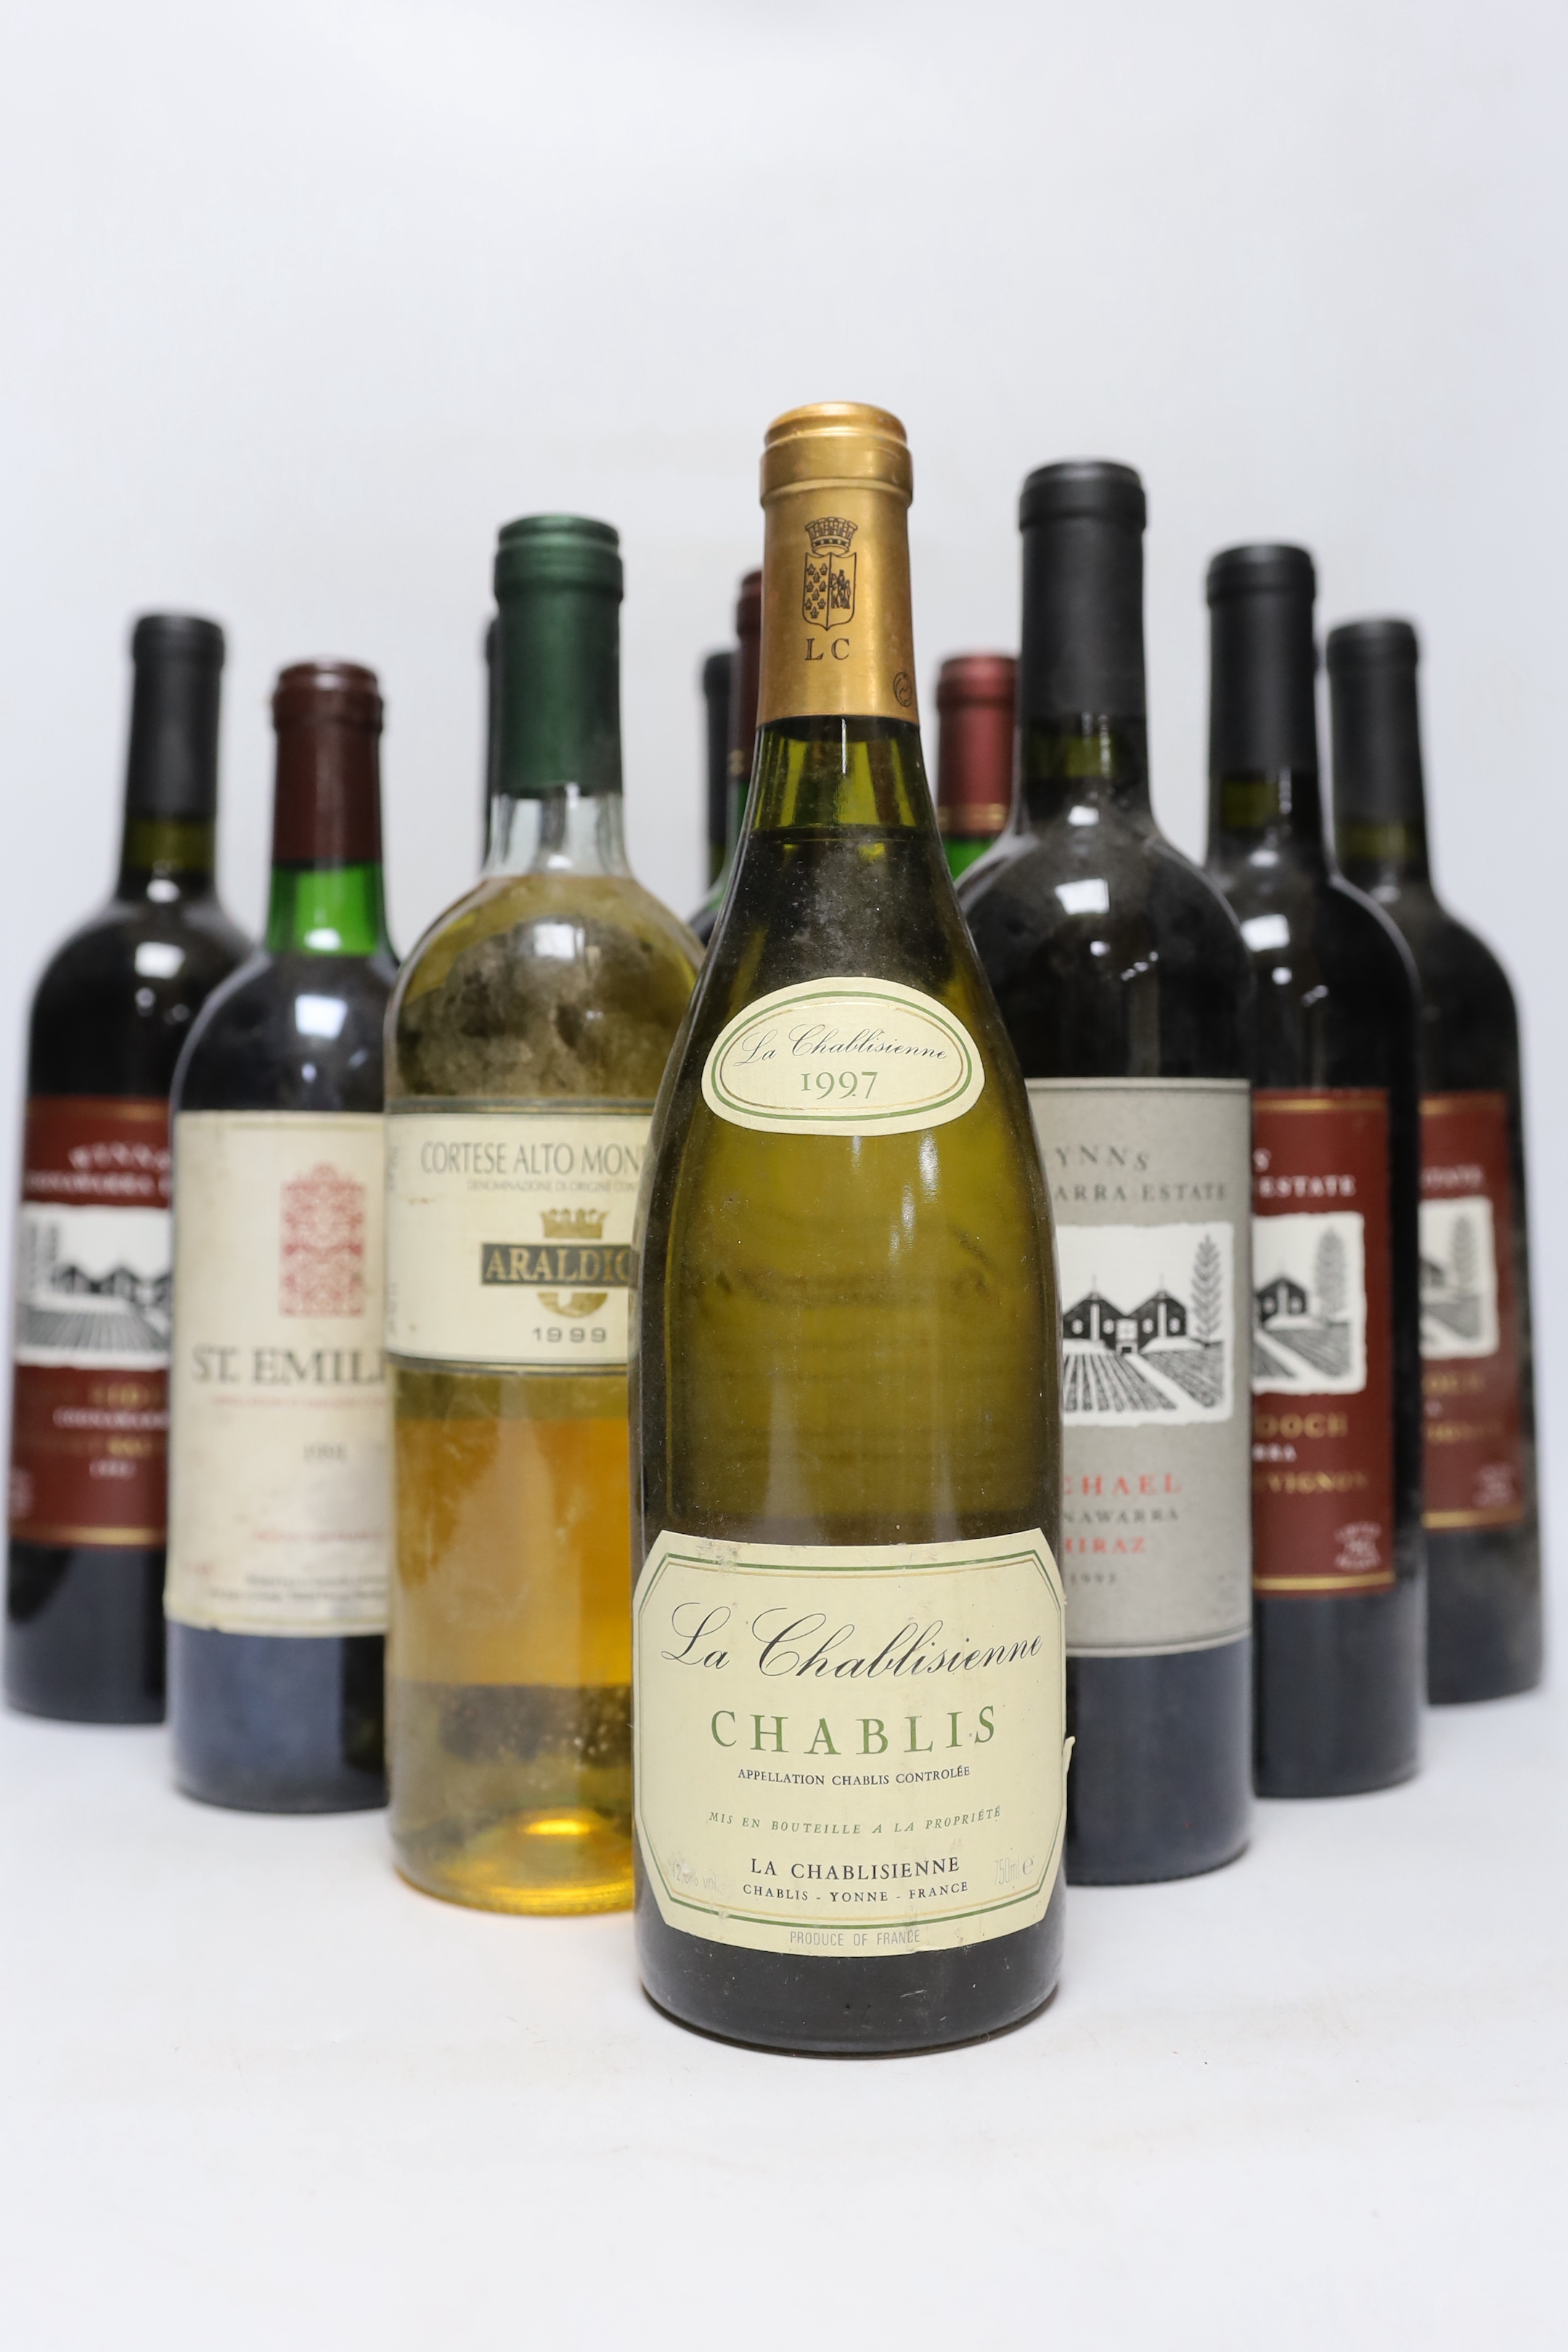 Eleven bottles of assorted wine to include Wynns Coonawarra Estate Cabernet Sauvignon and Shiraz 1993 (7) St Emilion 1991 (1) Chablis 1997 (1)